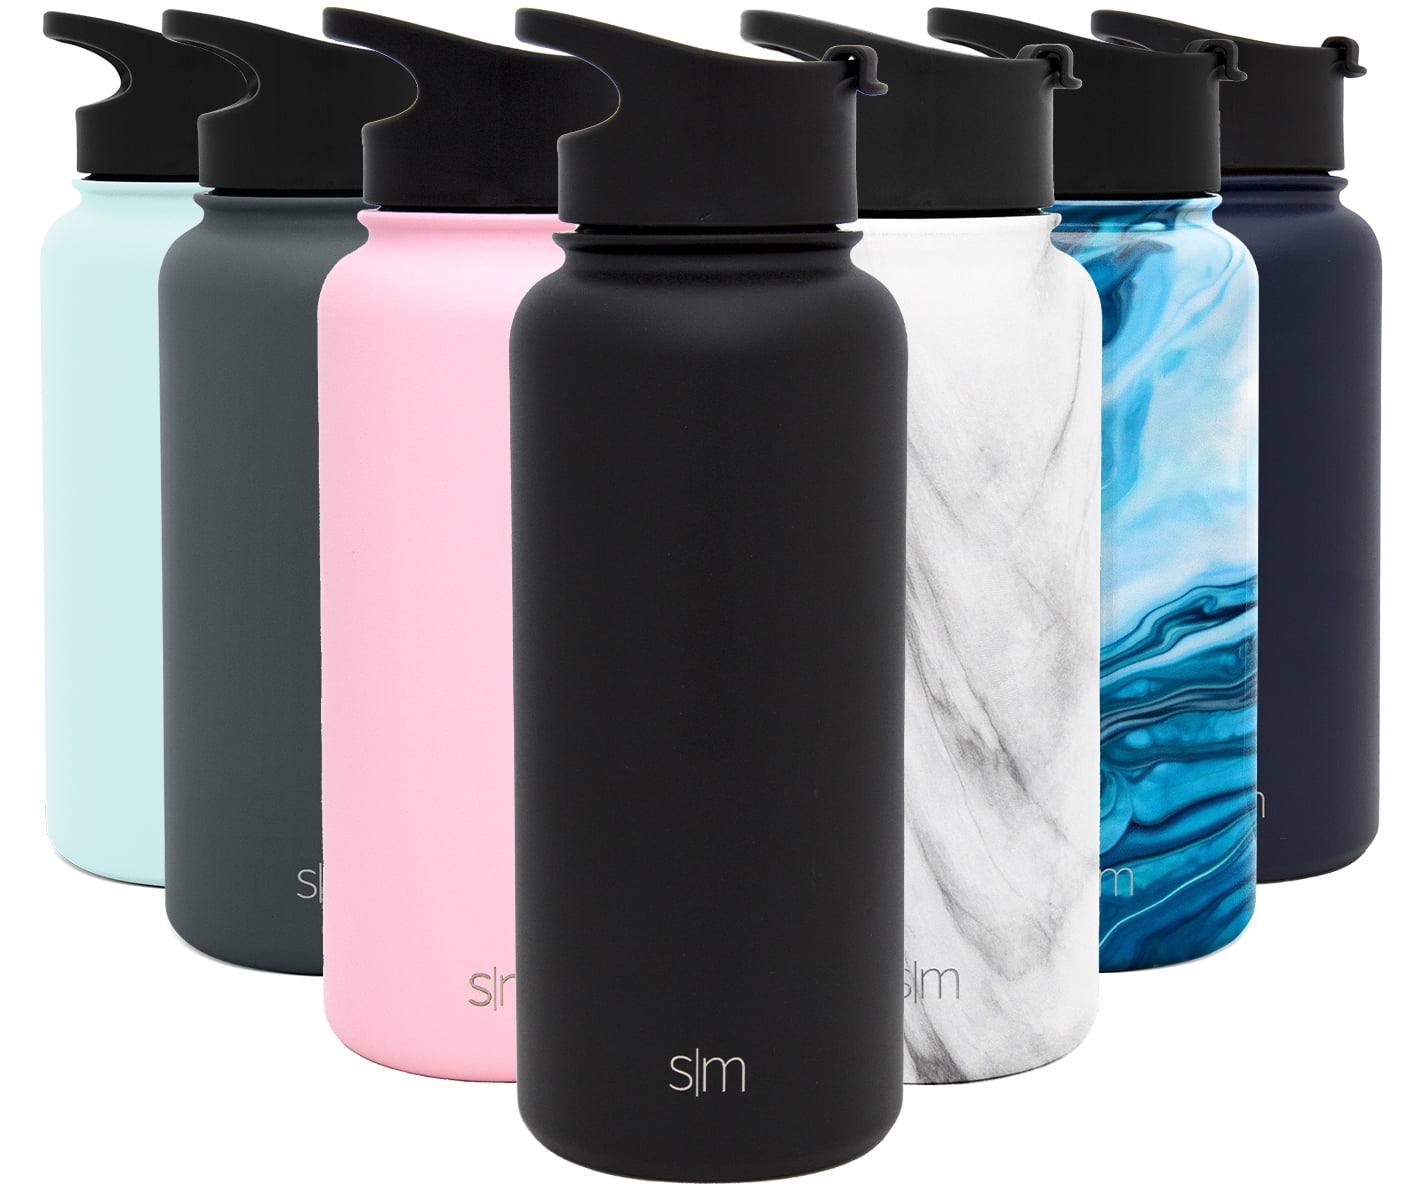 New Tag Large Capacity Water Bottle Simple Modern Insulated